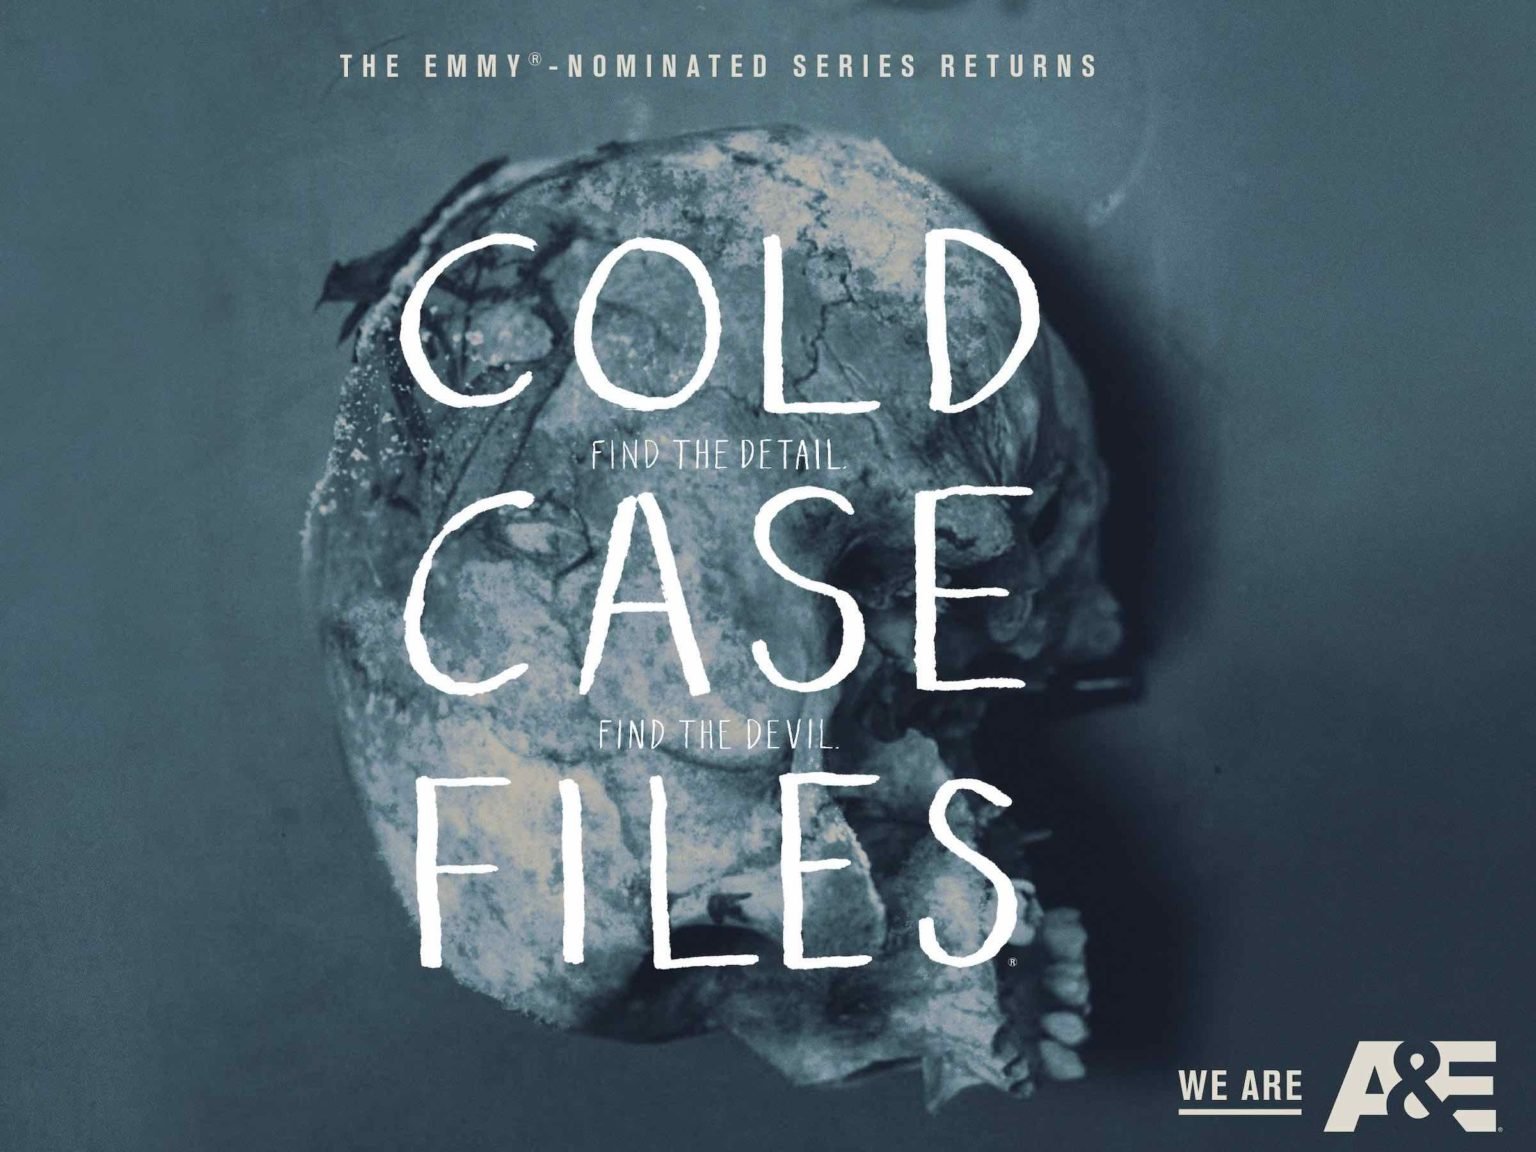 We’ve rounded up some of the very best episodes of 'Cold Case Files', for those of you who are looking to curl up with a good mystery.